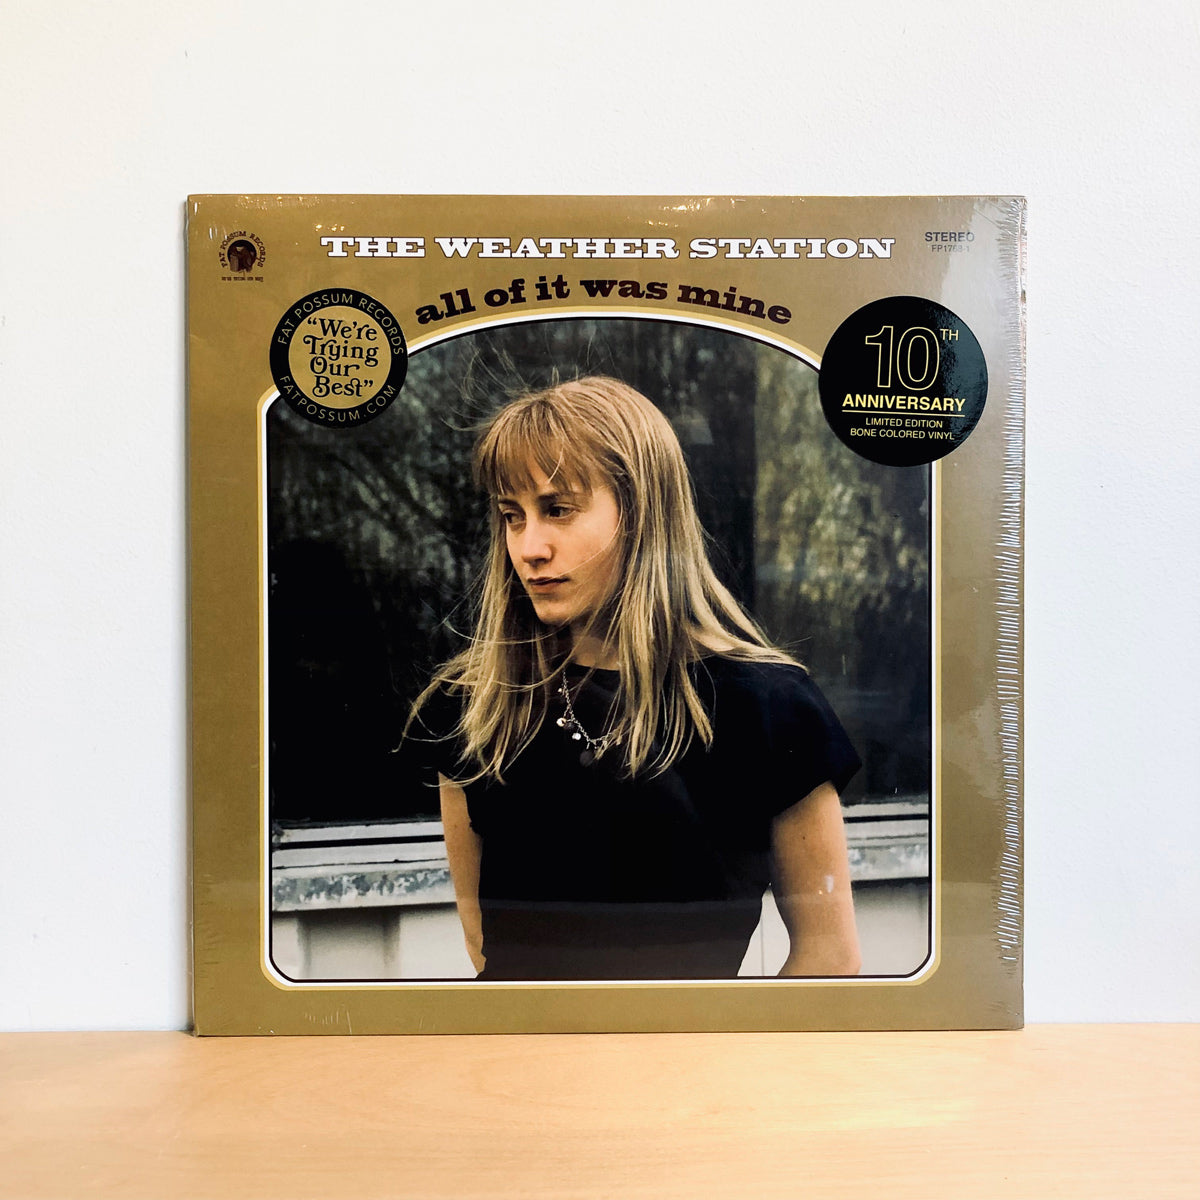 The Weather Station - All Of It Was Mine. LP [10th Anniversary Bone Coloured Vinyl]